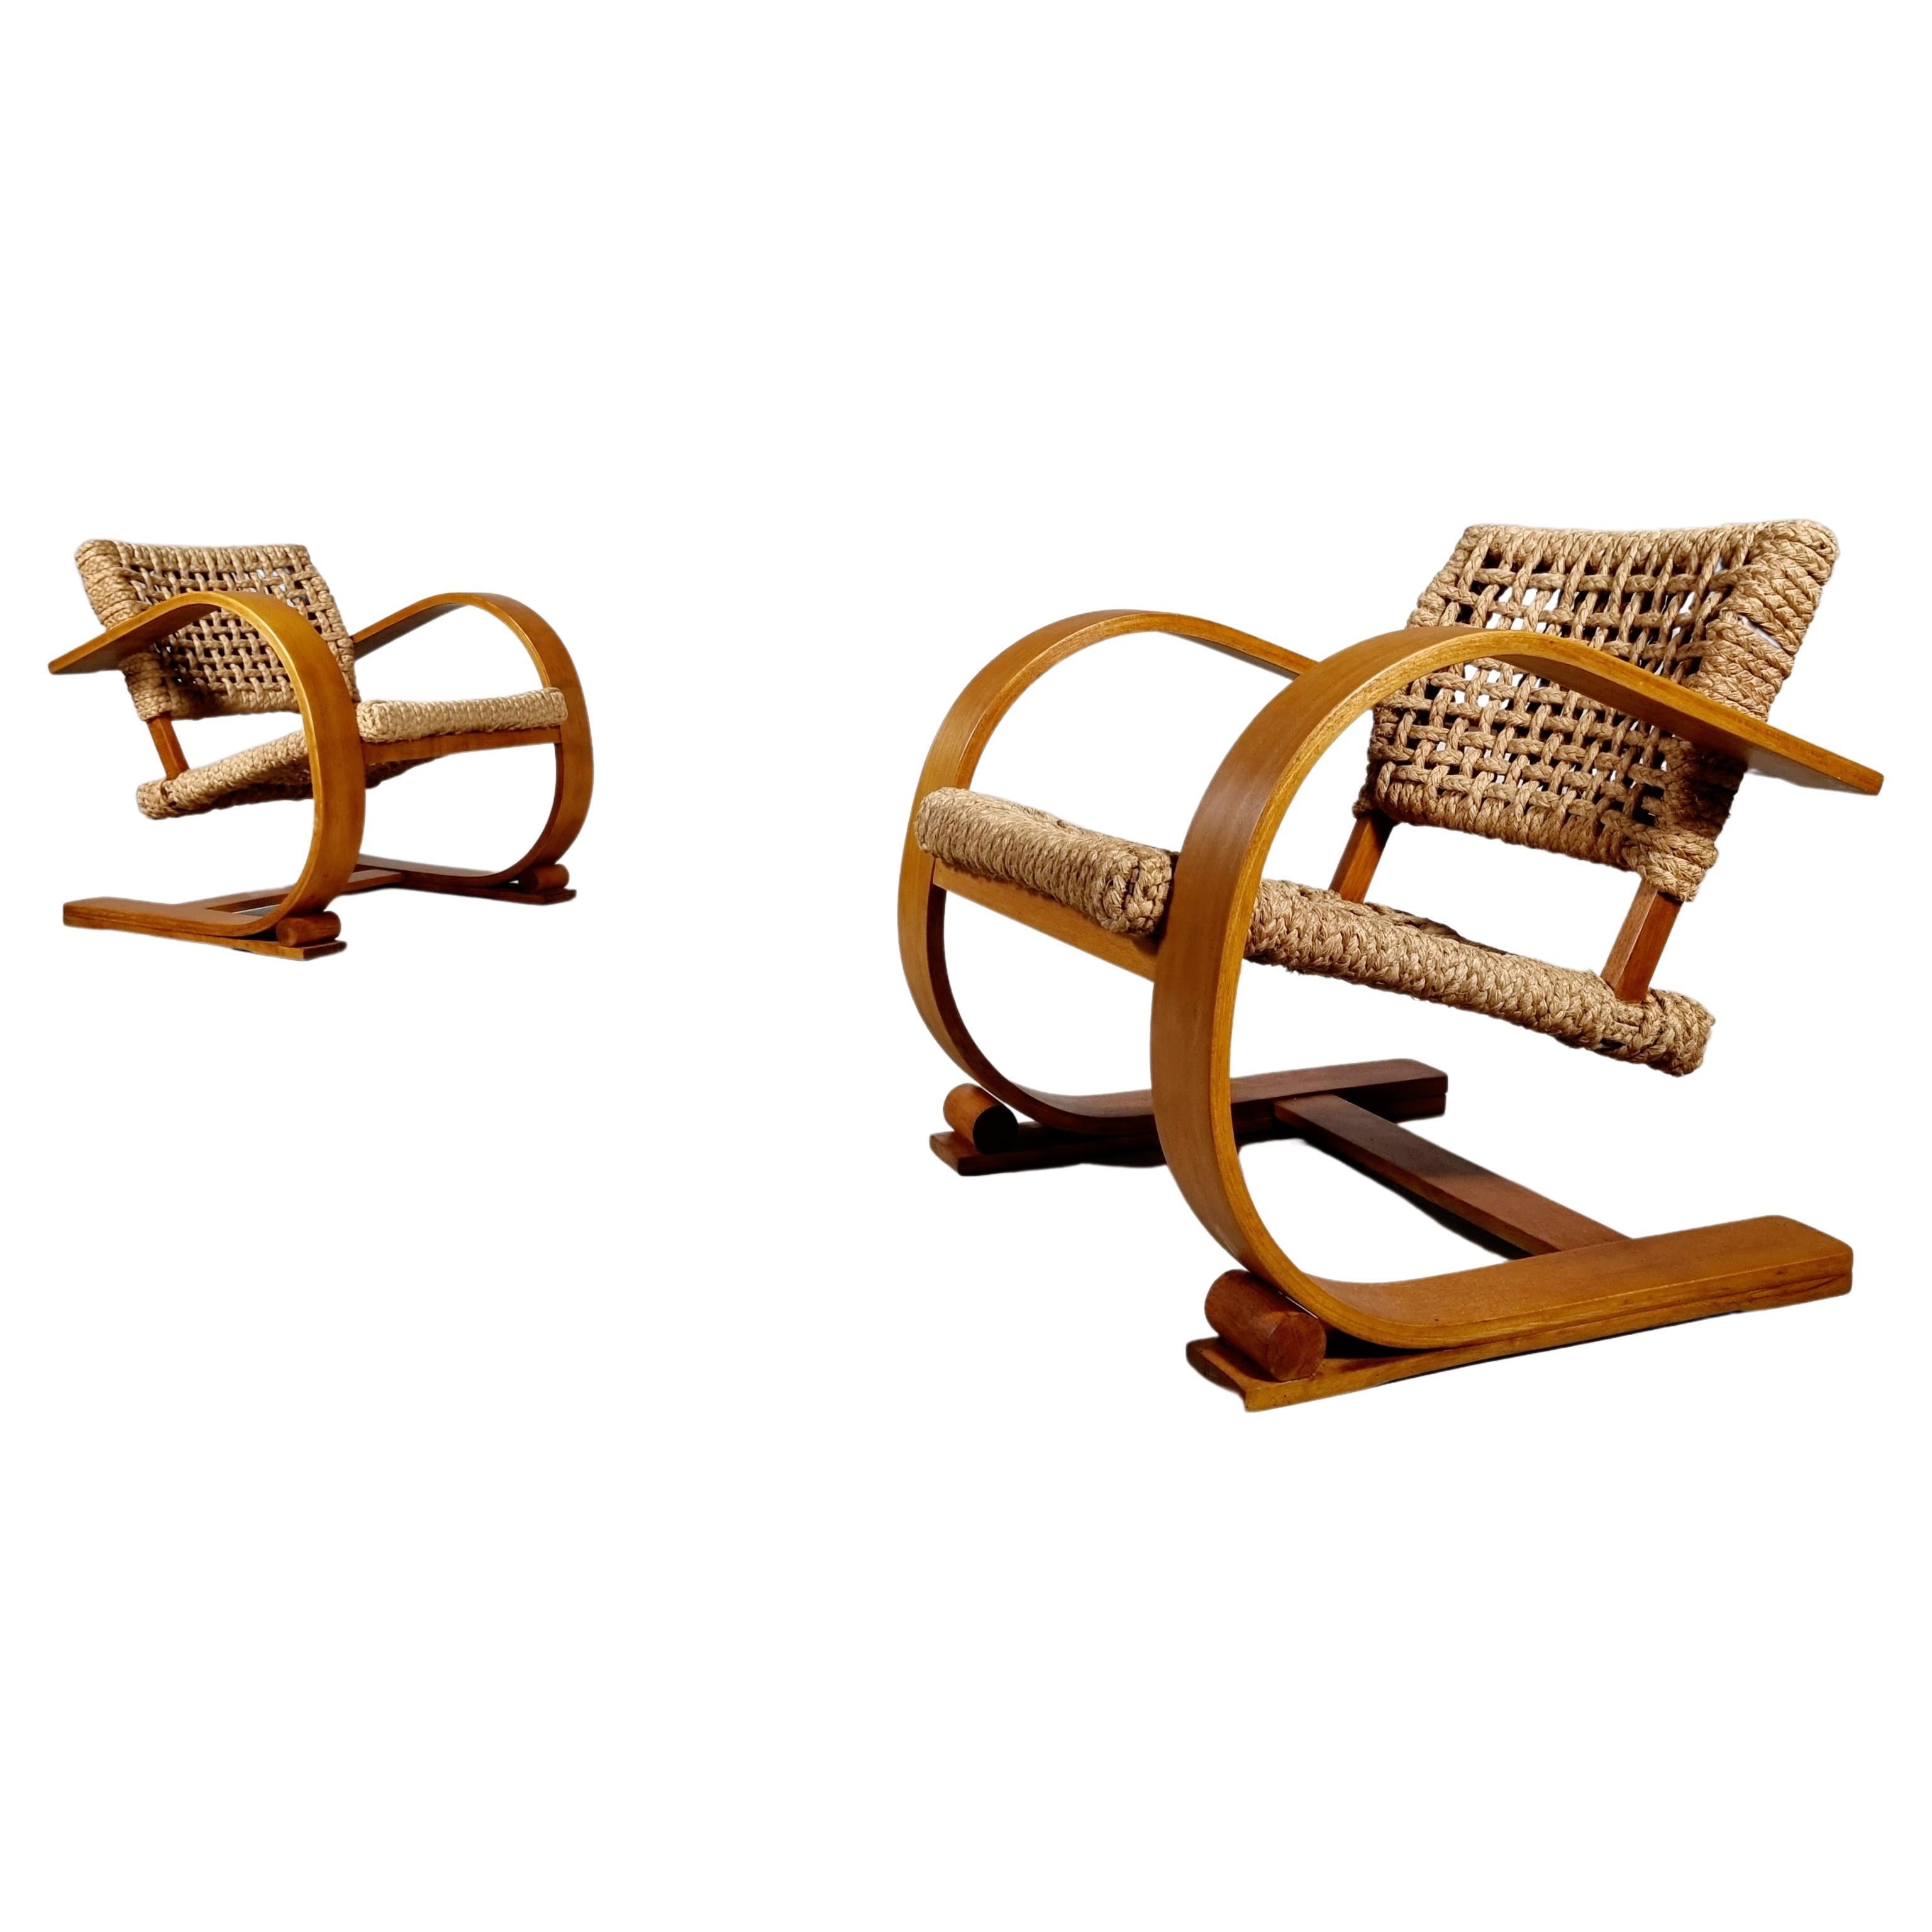 Adrien Audoux & Frida Minet Rope Easy Chairs for Vibo ca. 1940 Paris, France